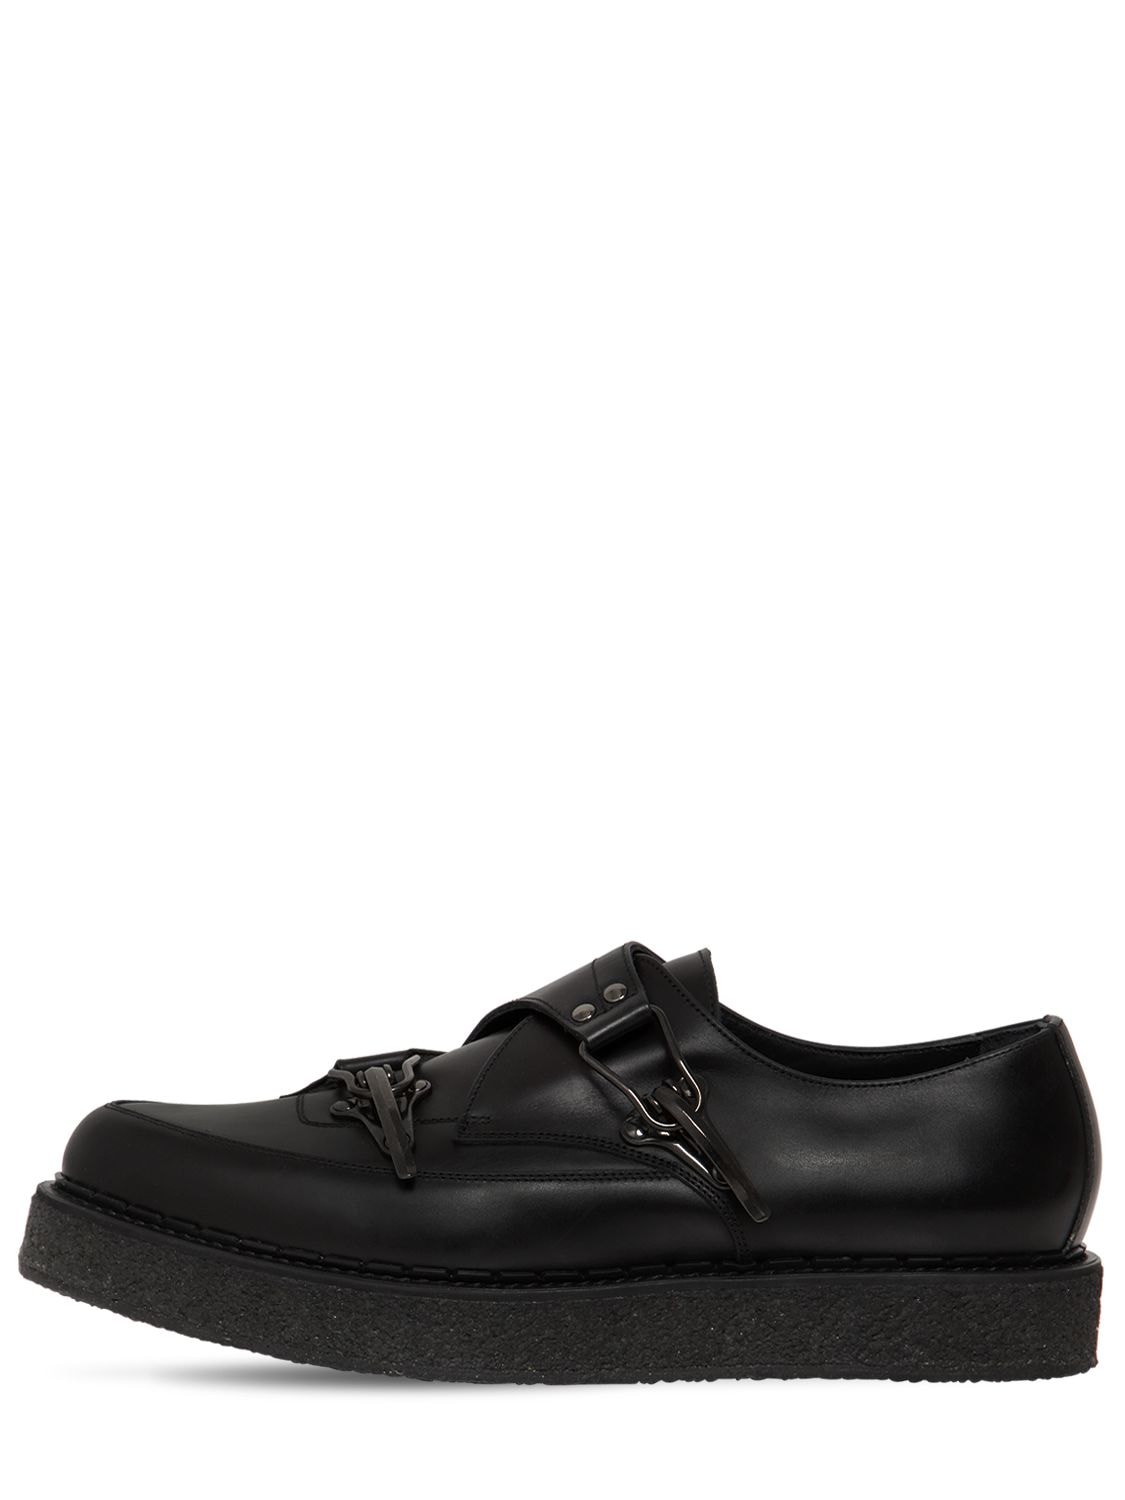 Faqtory Buckle Leather Creeper Loafers In Black